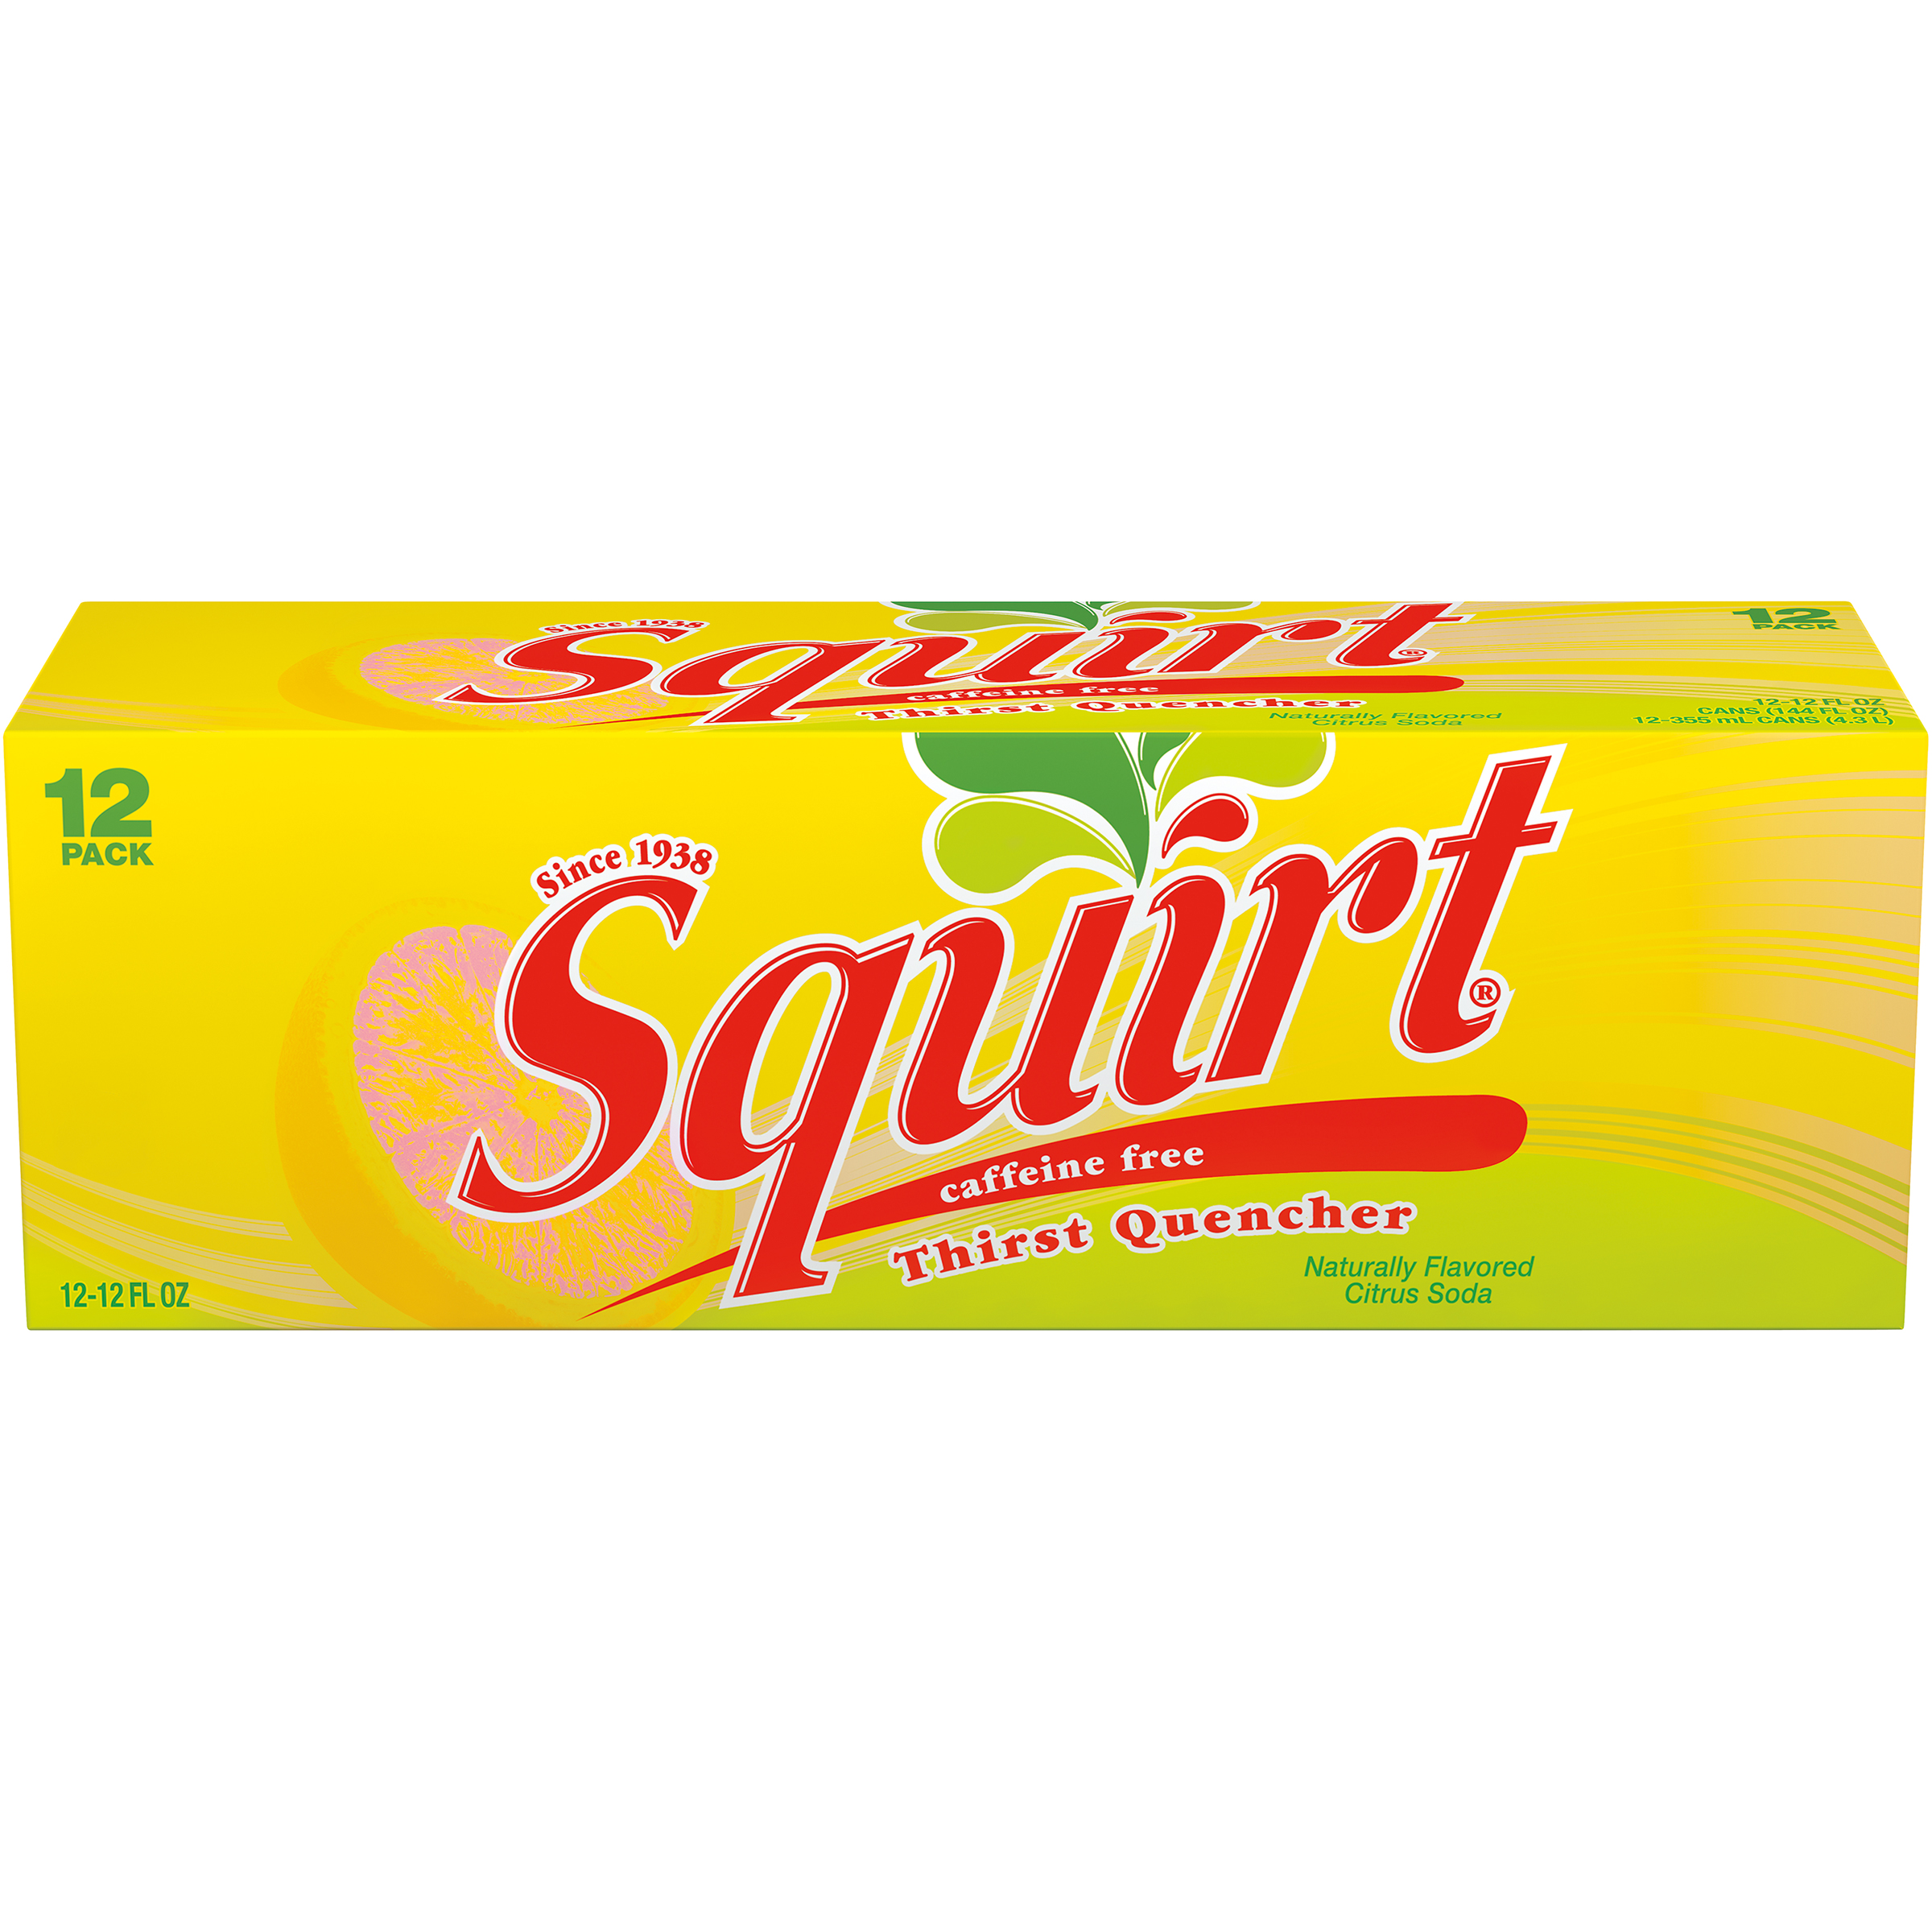 12 pack of squirt